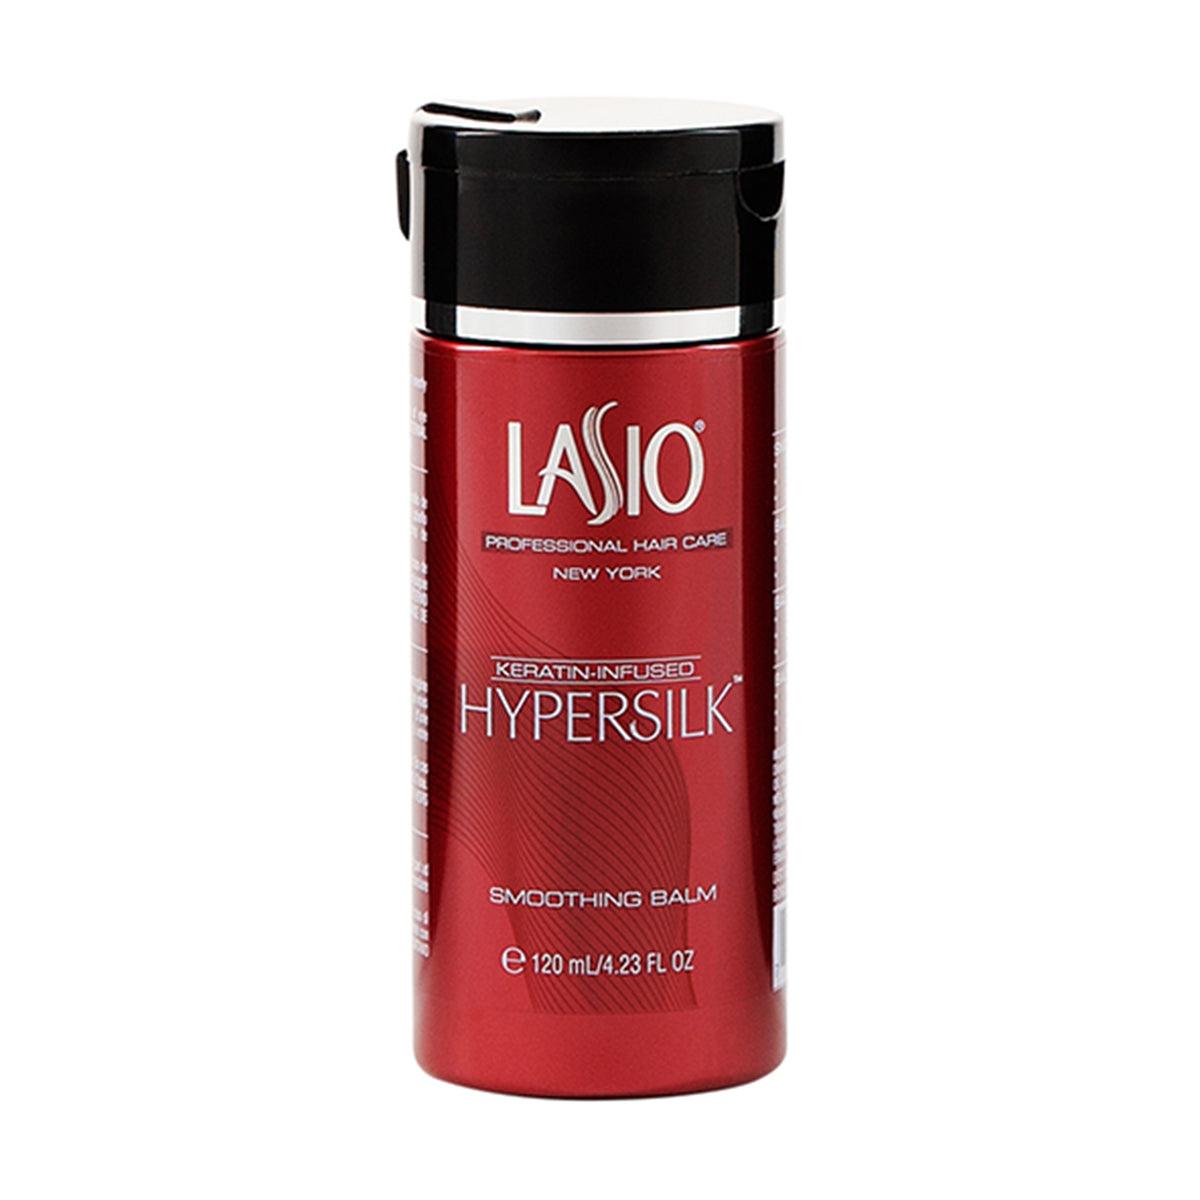 Lasio Hypersilk Smoothing Balm - The Coloroom 